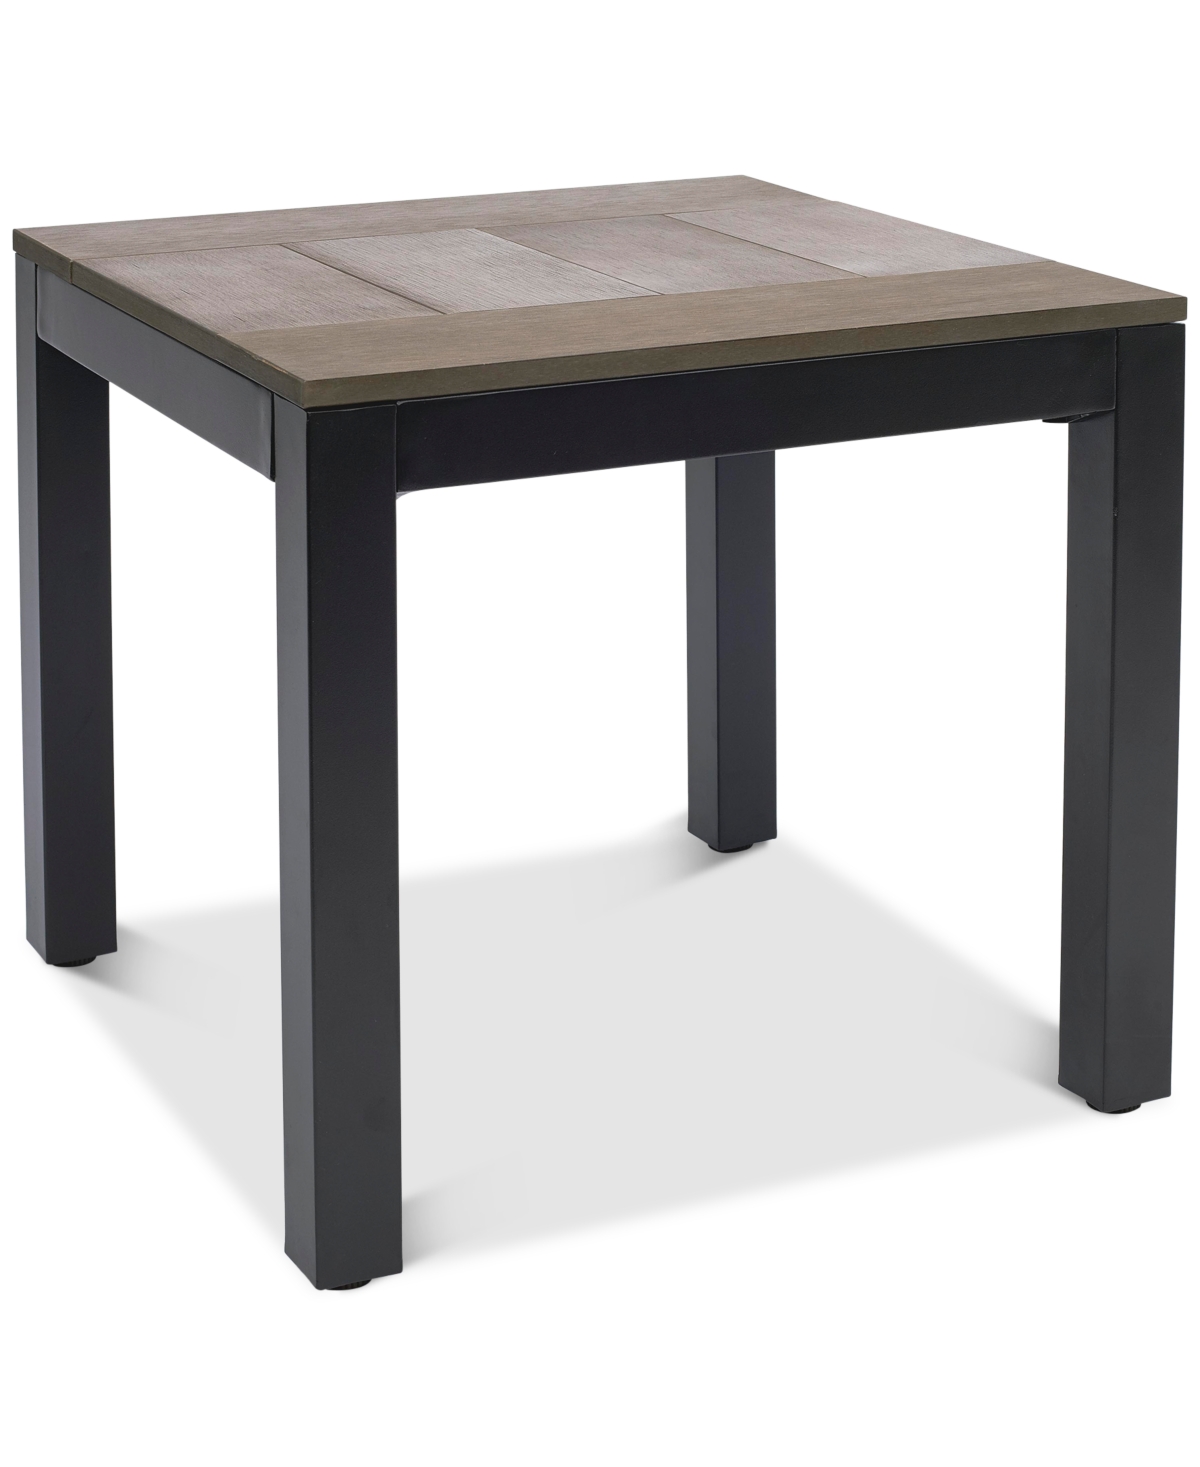 Stockholm Outdoor End Table, Created for Macys